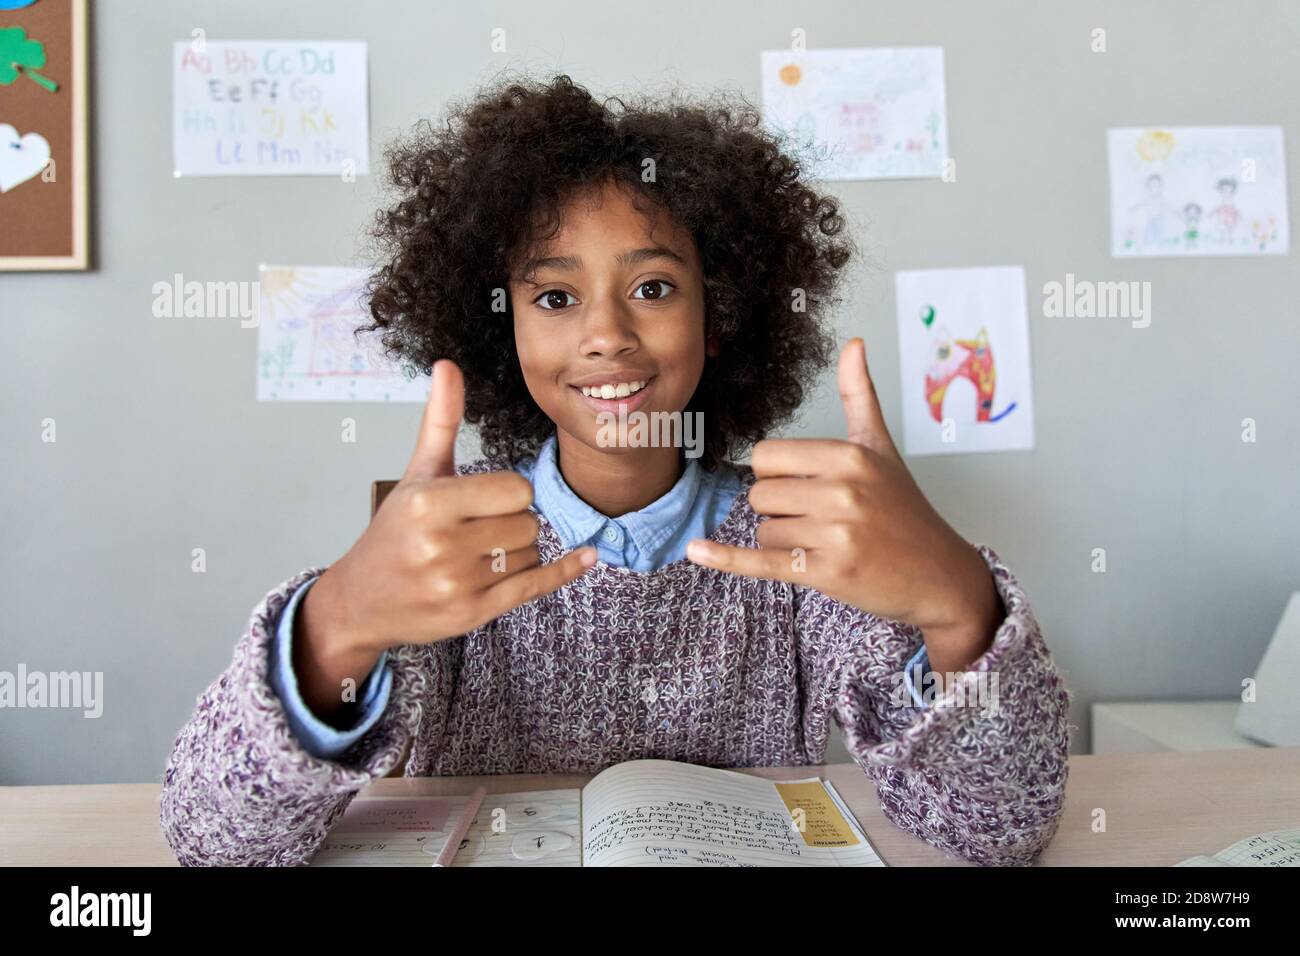 African deaf kid girl showing sign language gesture looking at camera. Stock Photo